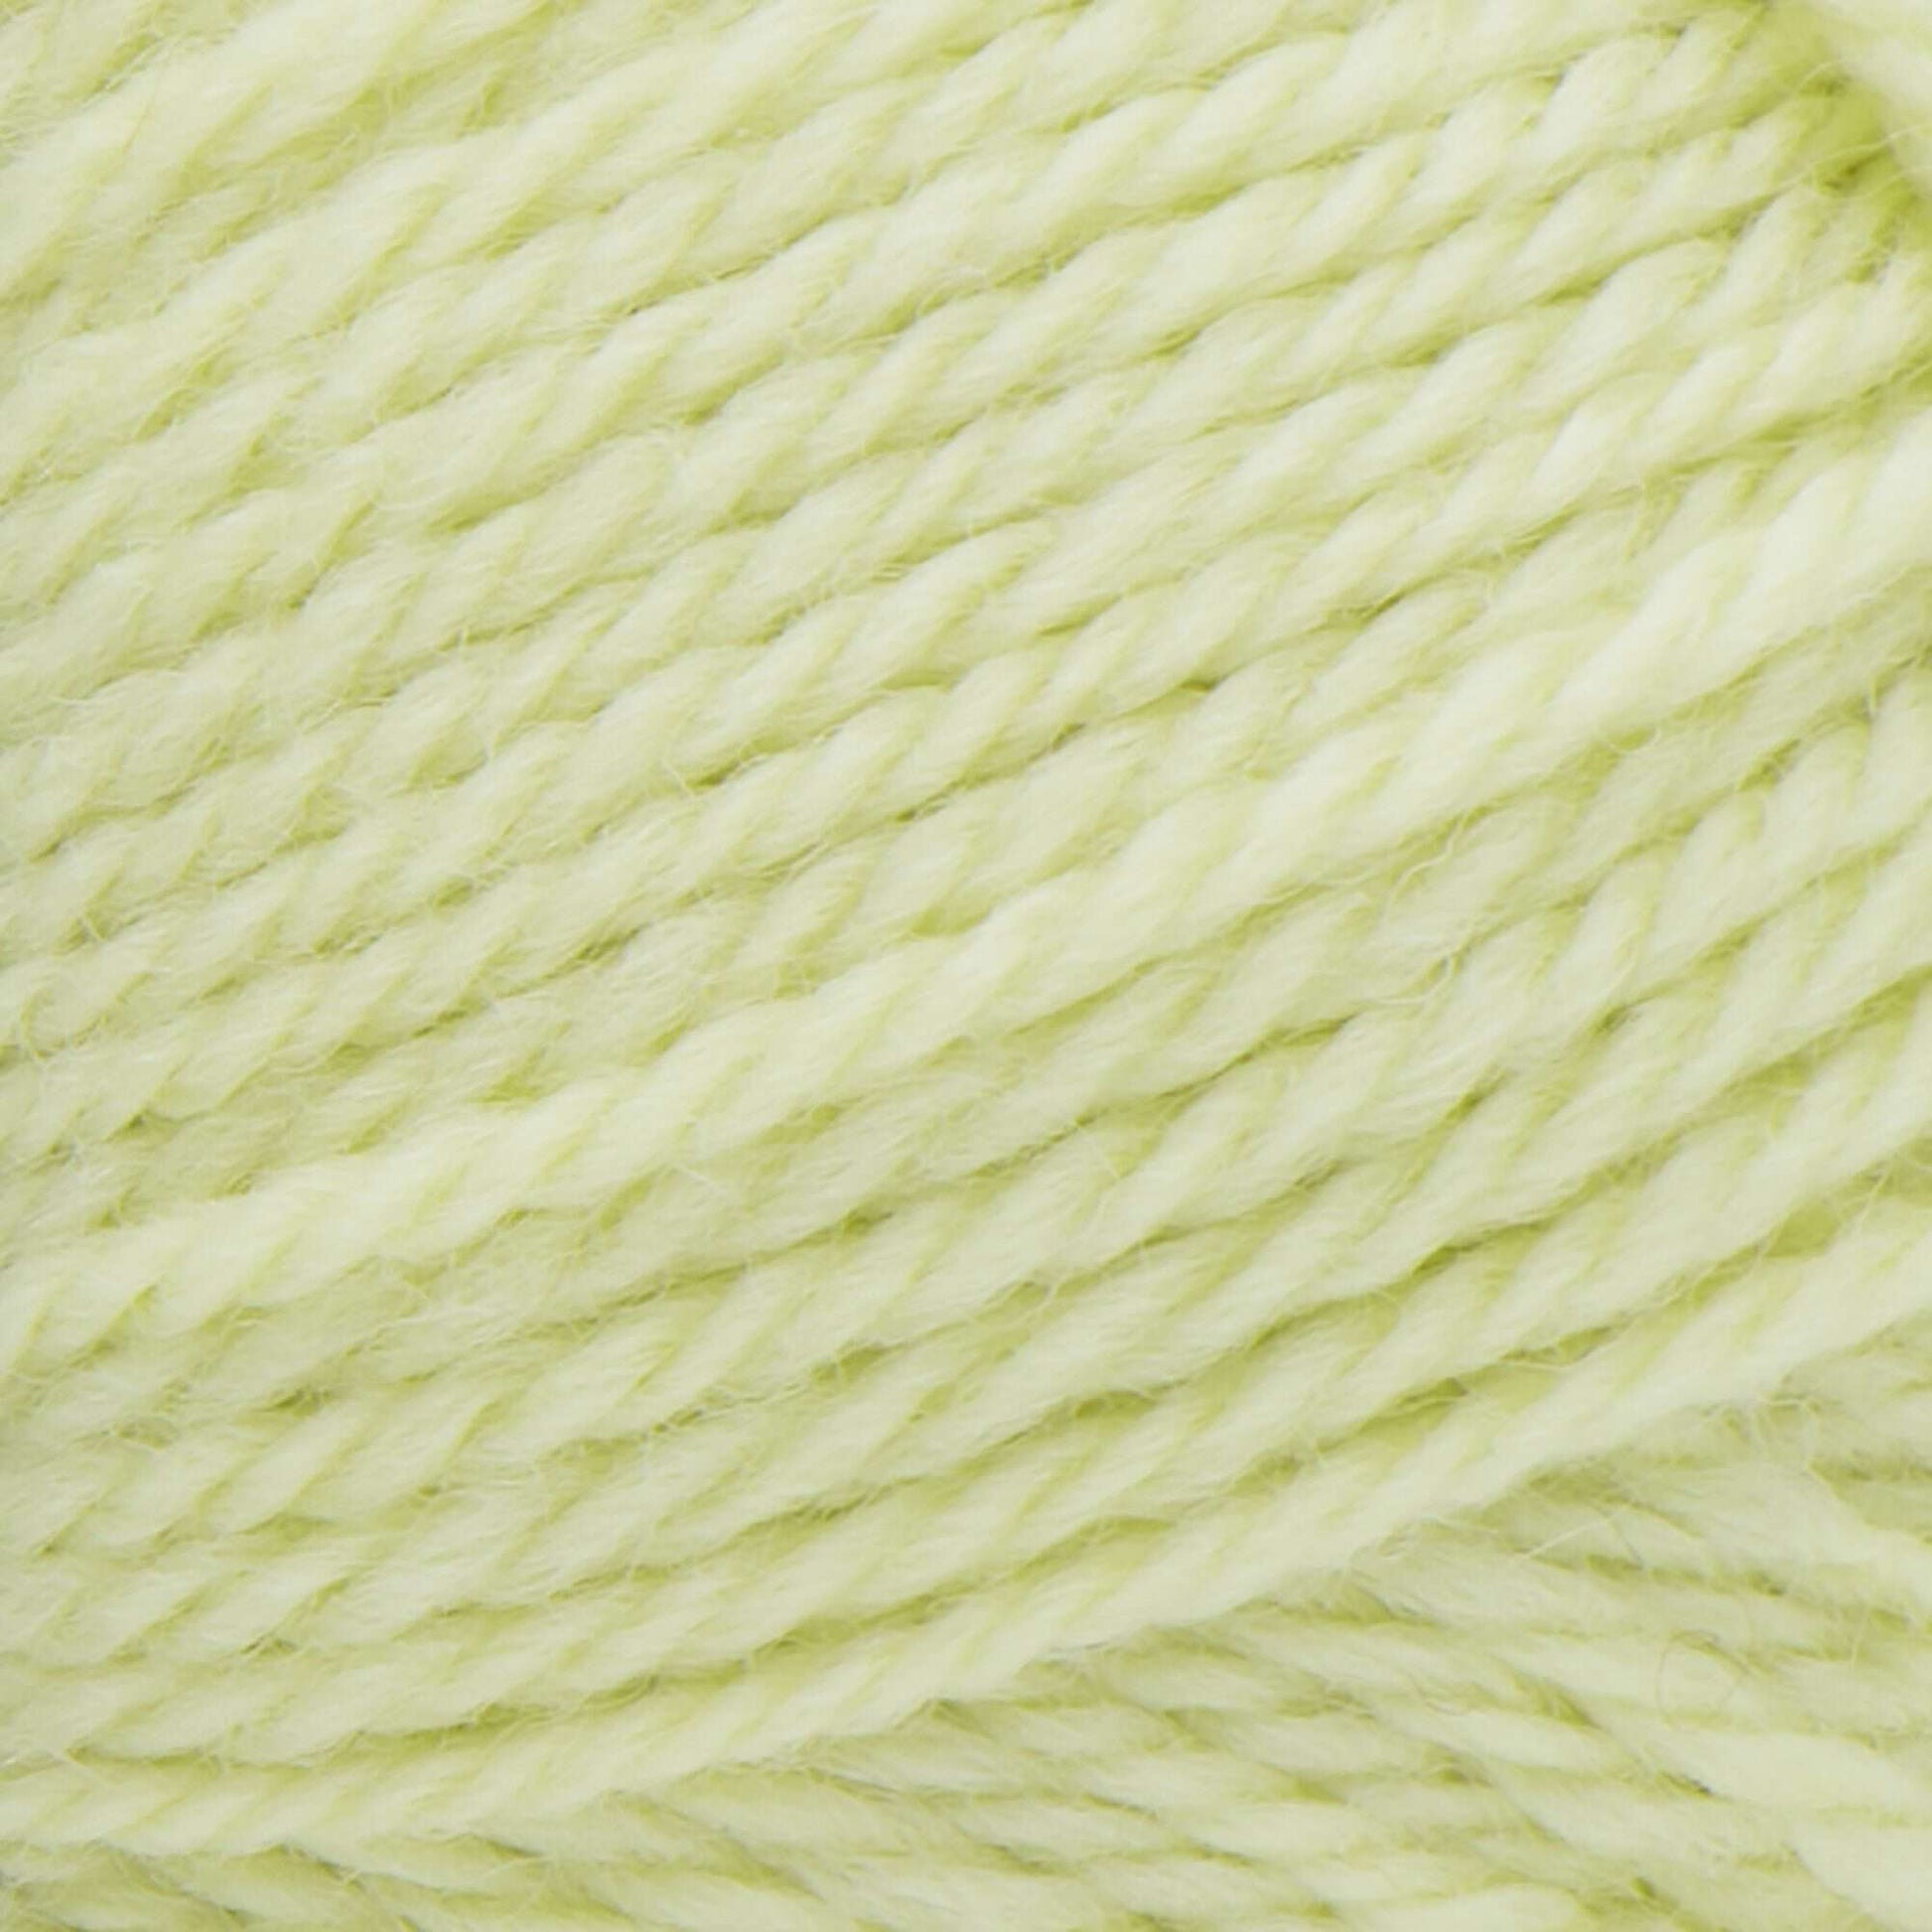 Patons Classic Wool Worsted Yarn Soft Sprout